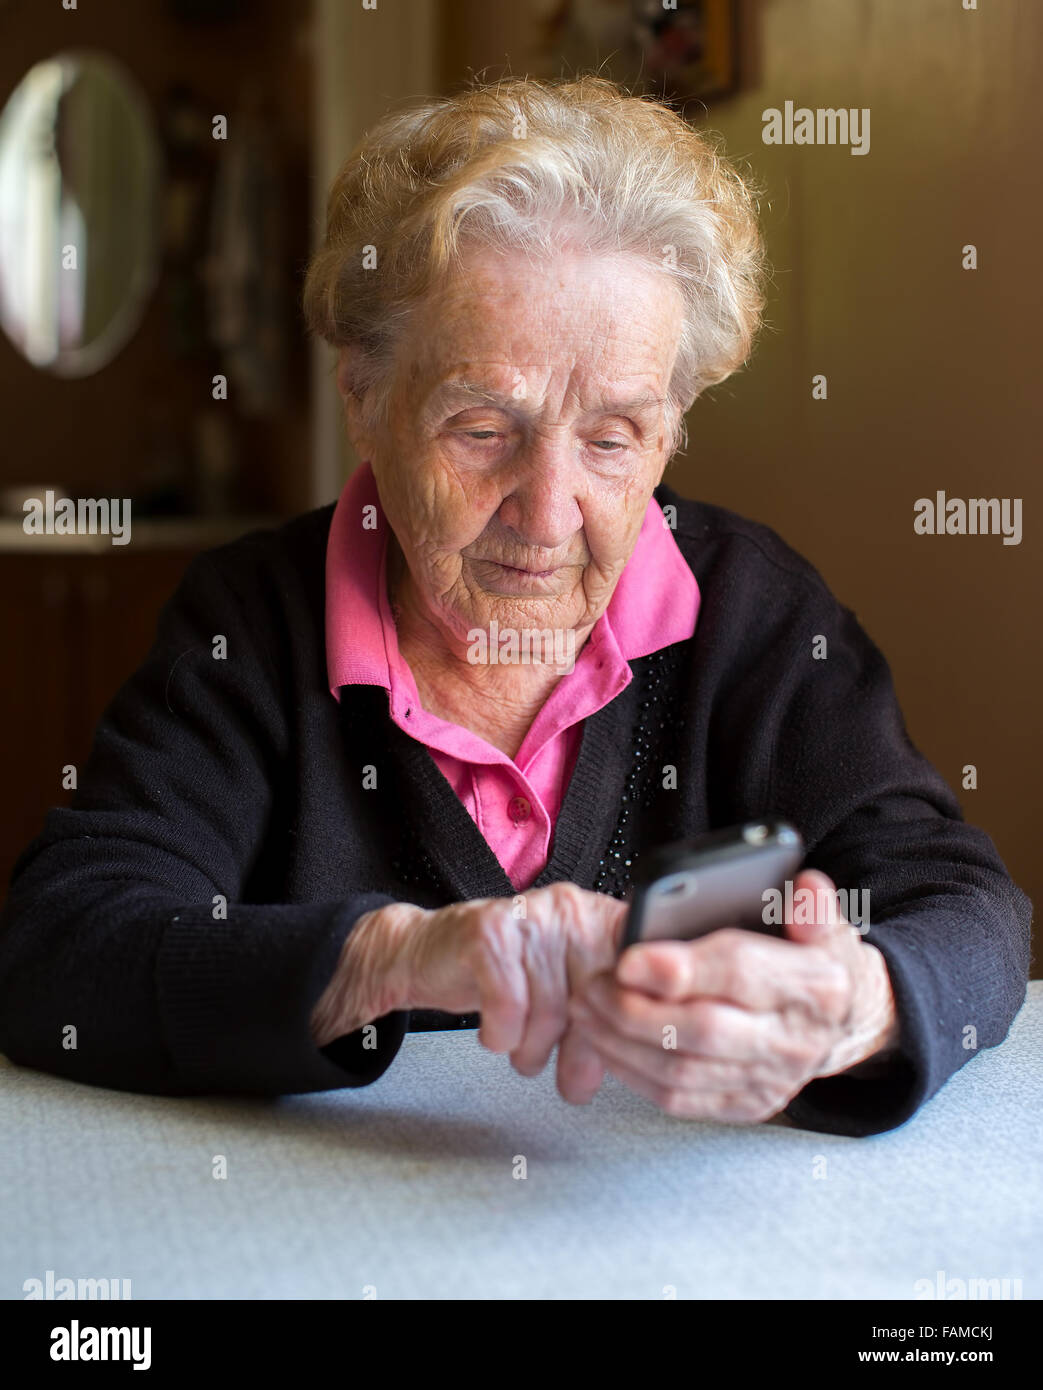 An elderly woman typing on smartphone sitting at the table. Stock Photo